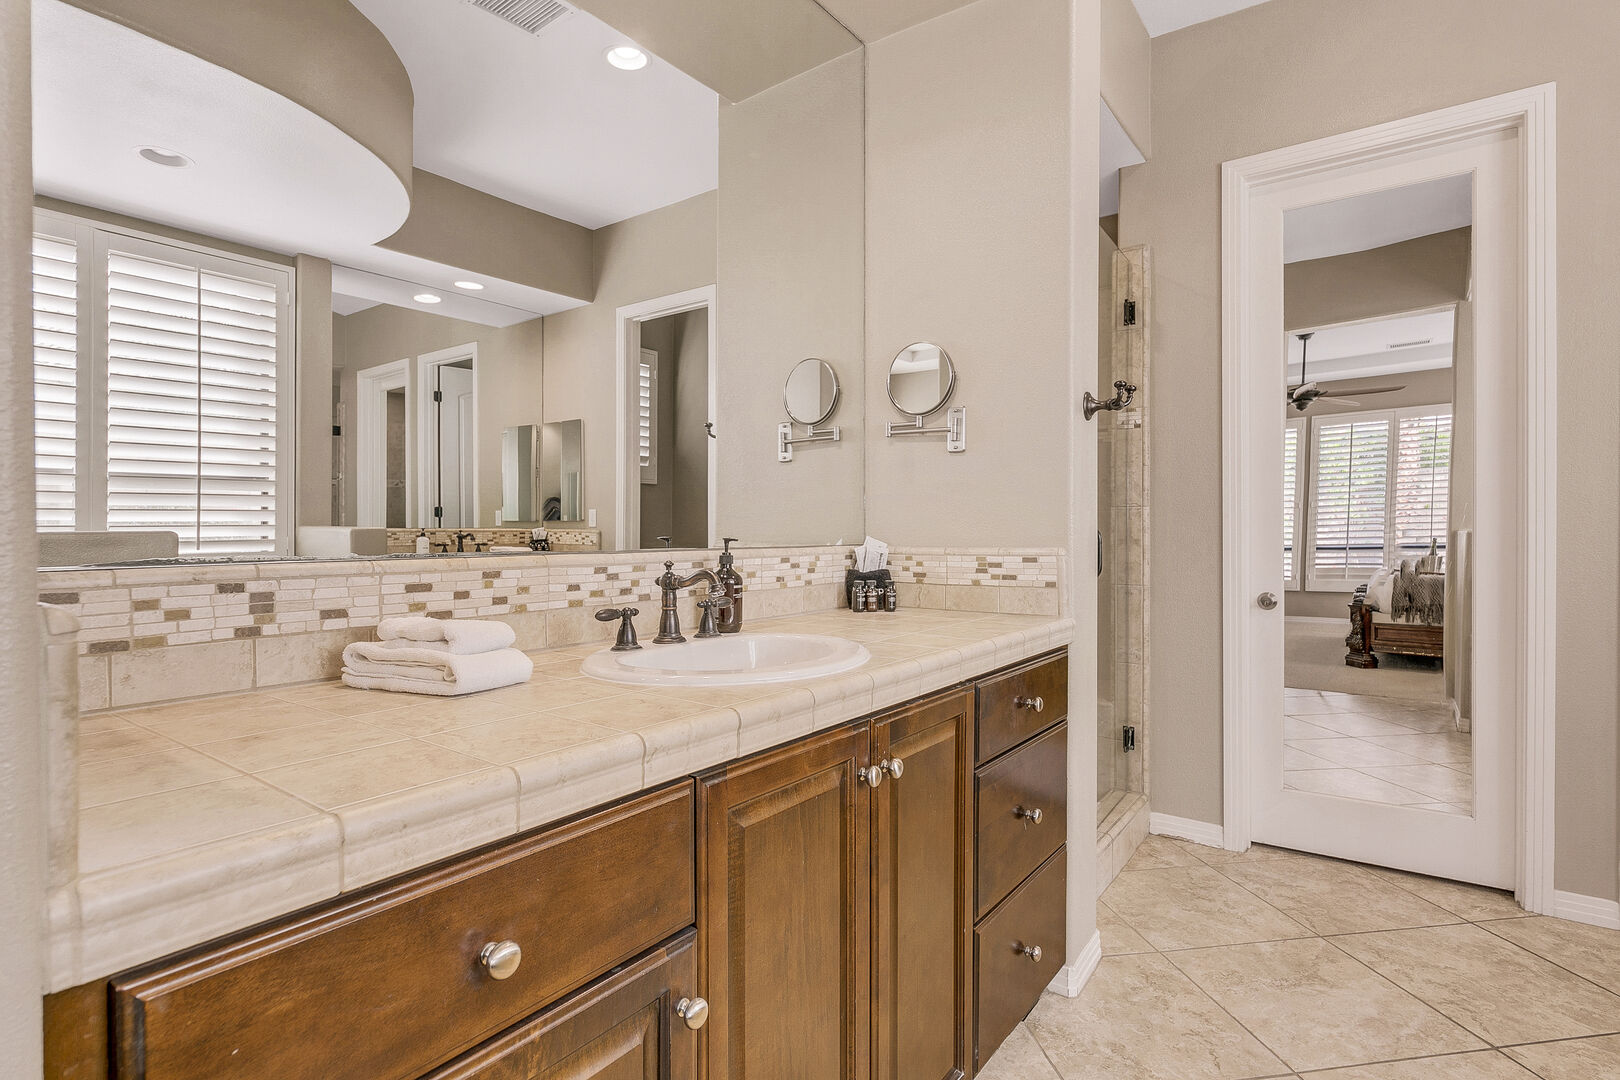 The private, en suite bathroom features a soaking tub, tile shower and his and her vanity sinks.